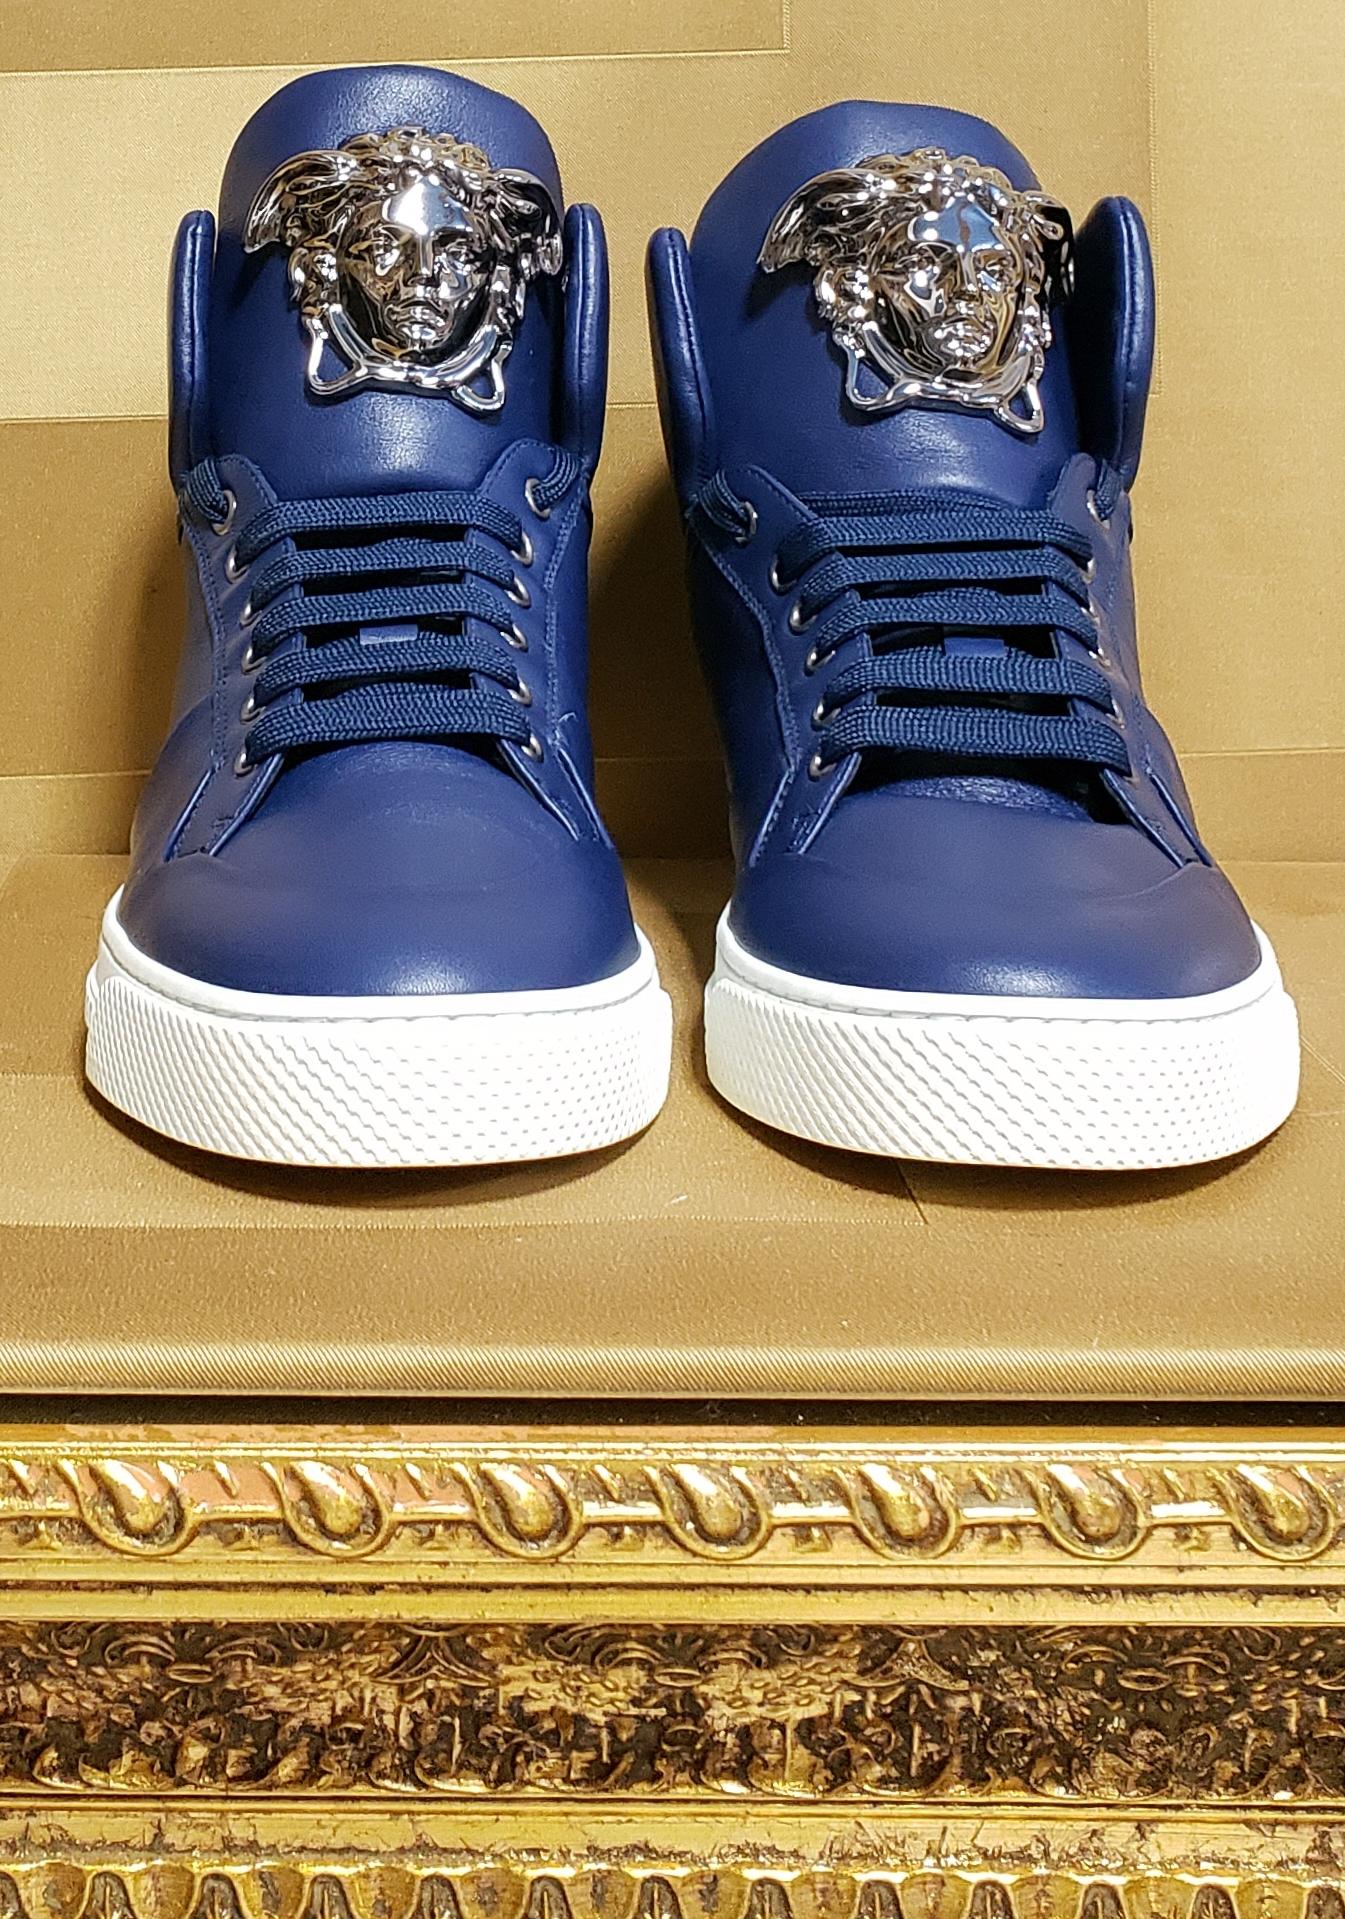 Blue VERSACE DARK BLUE LEATHER PALAZZO HIGH-TOP Sneakers size IT39 - US 6 For Sale